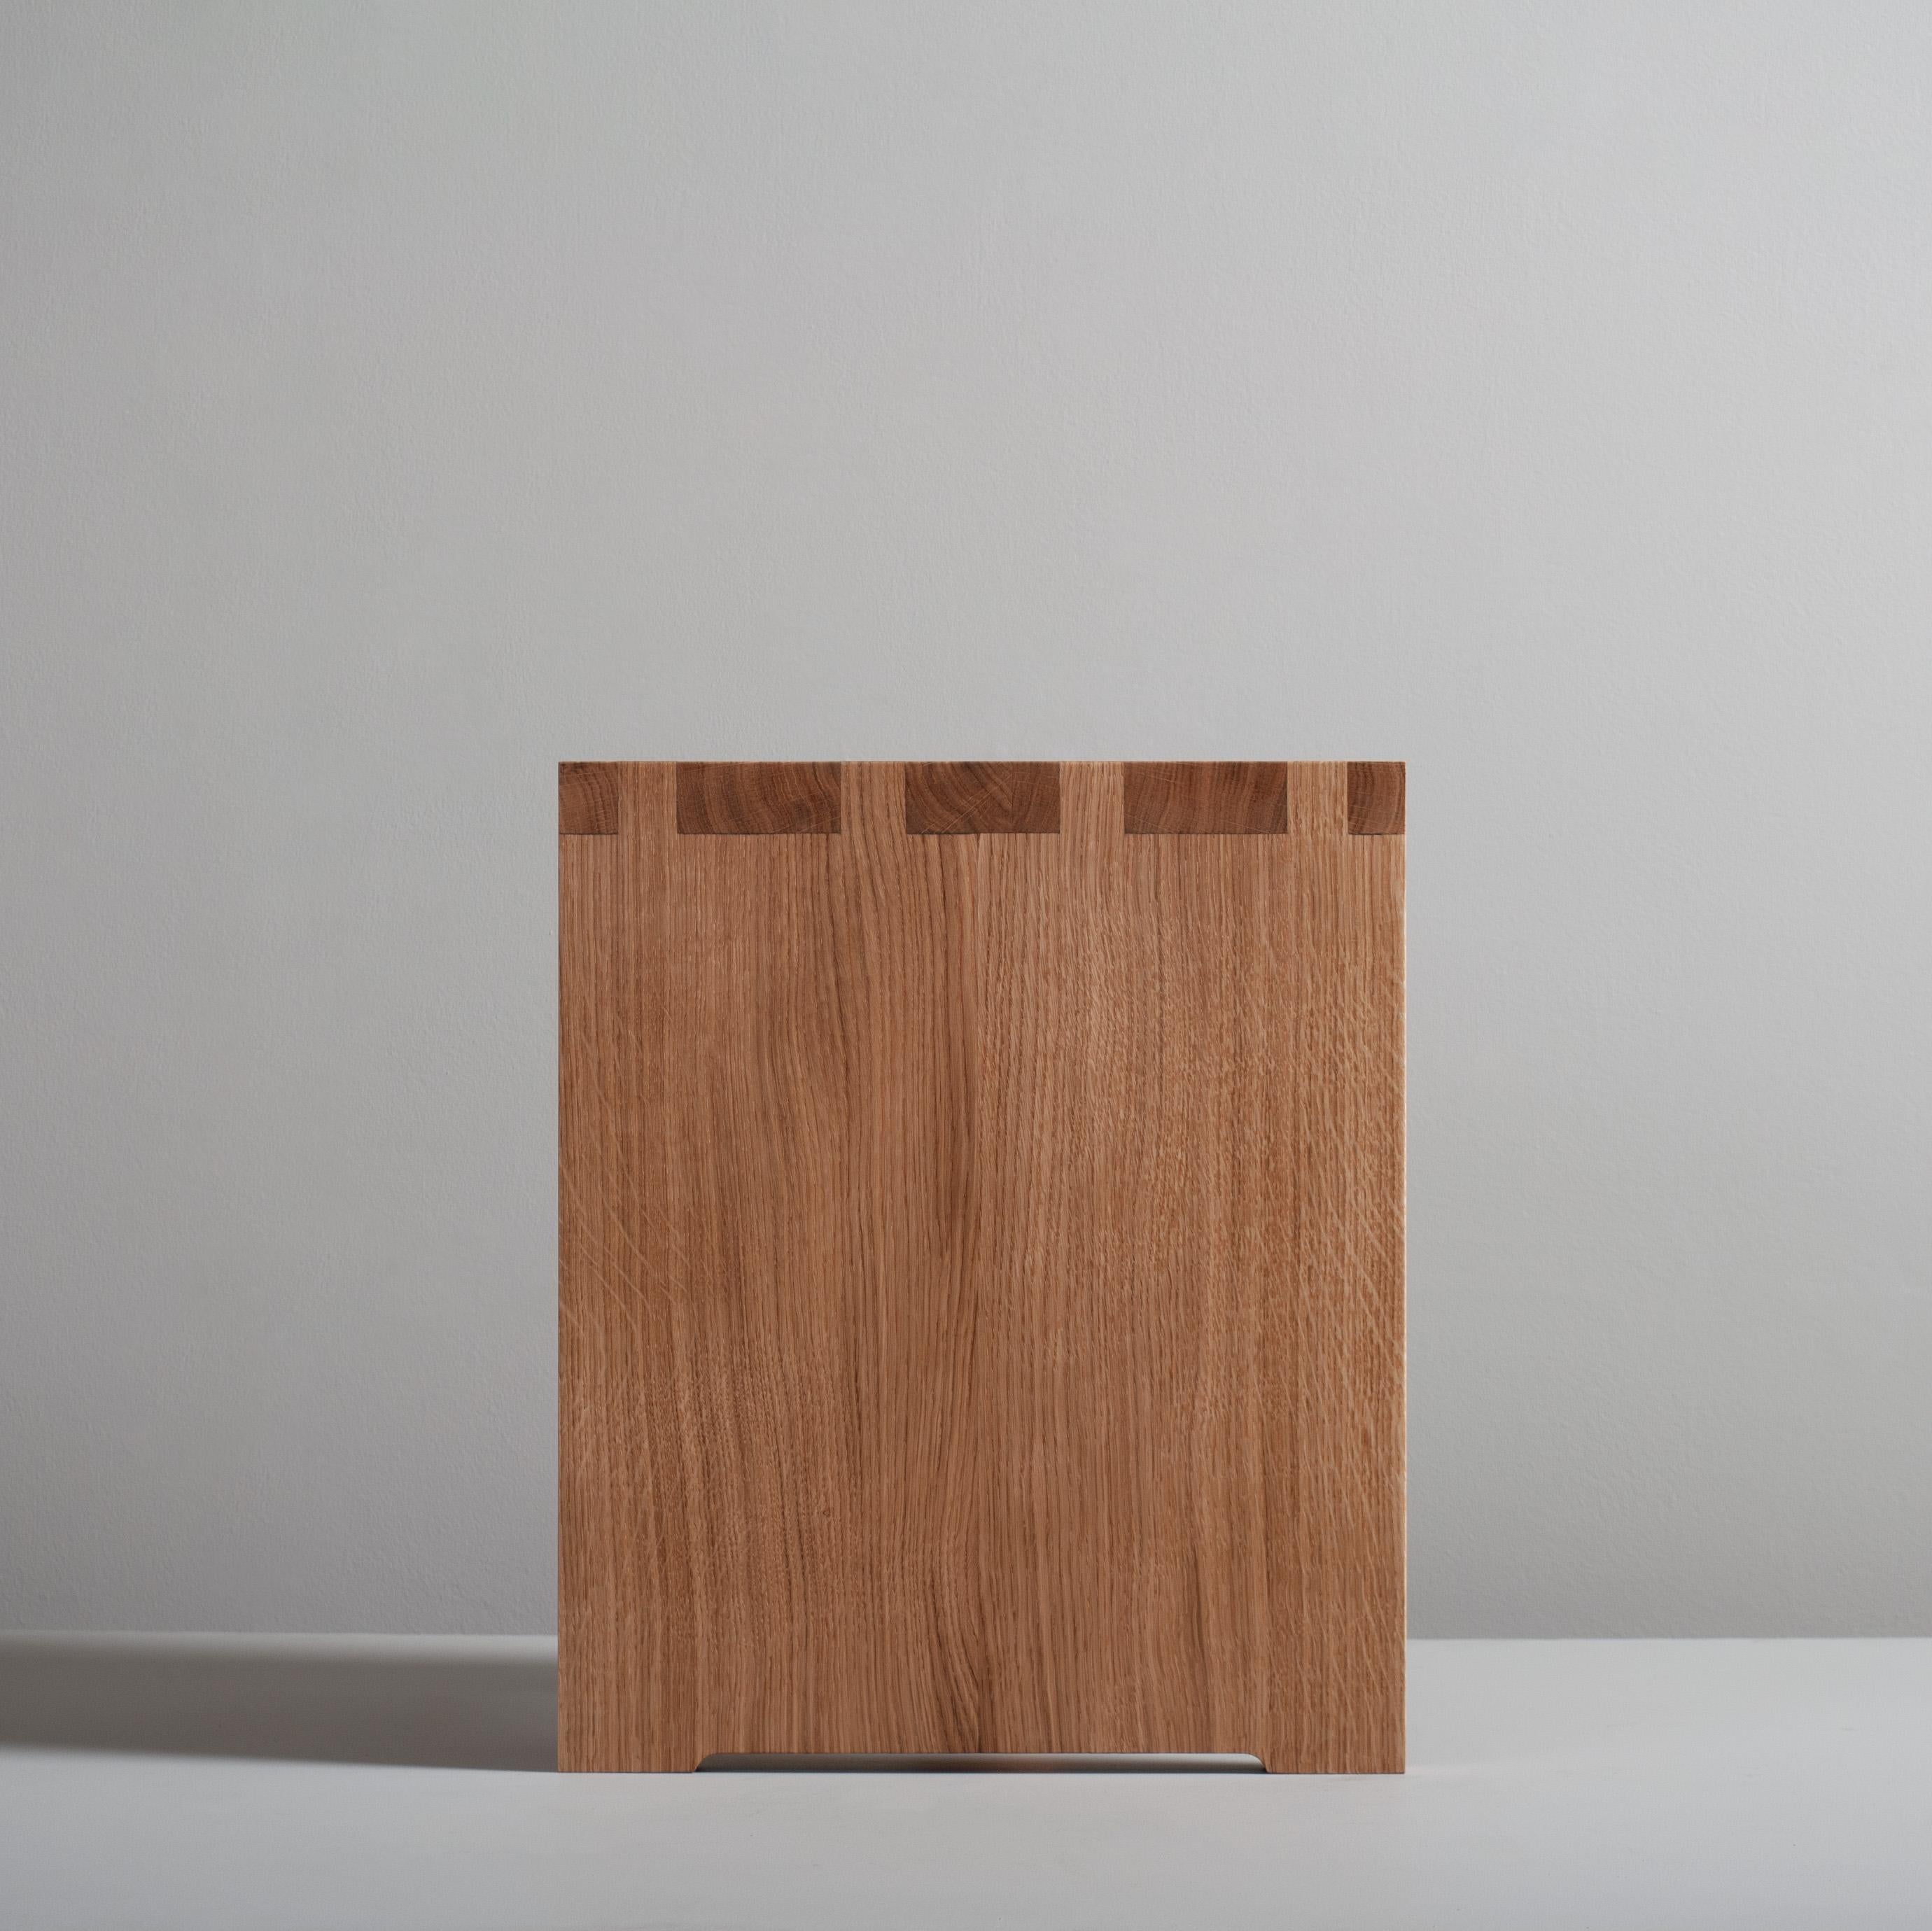 Architectural oak Pillar nightstands or end tables. Early European modernism inspired with a dash of Japanese minimalism - always focusing on the beauty of the materials. Designed by SUM furniture and handcrafted in England using traditional